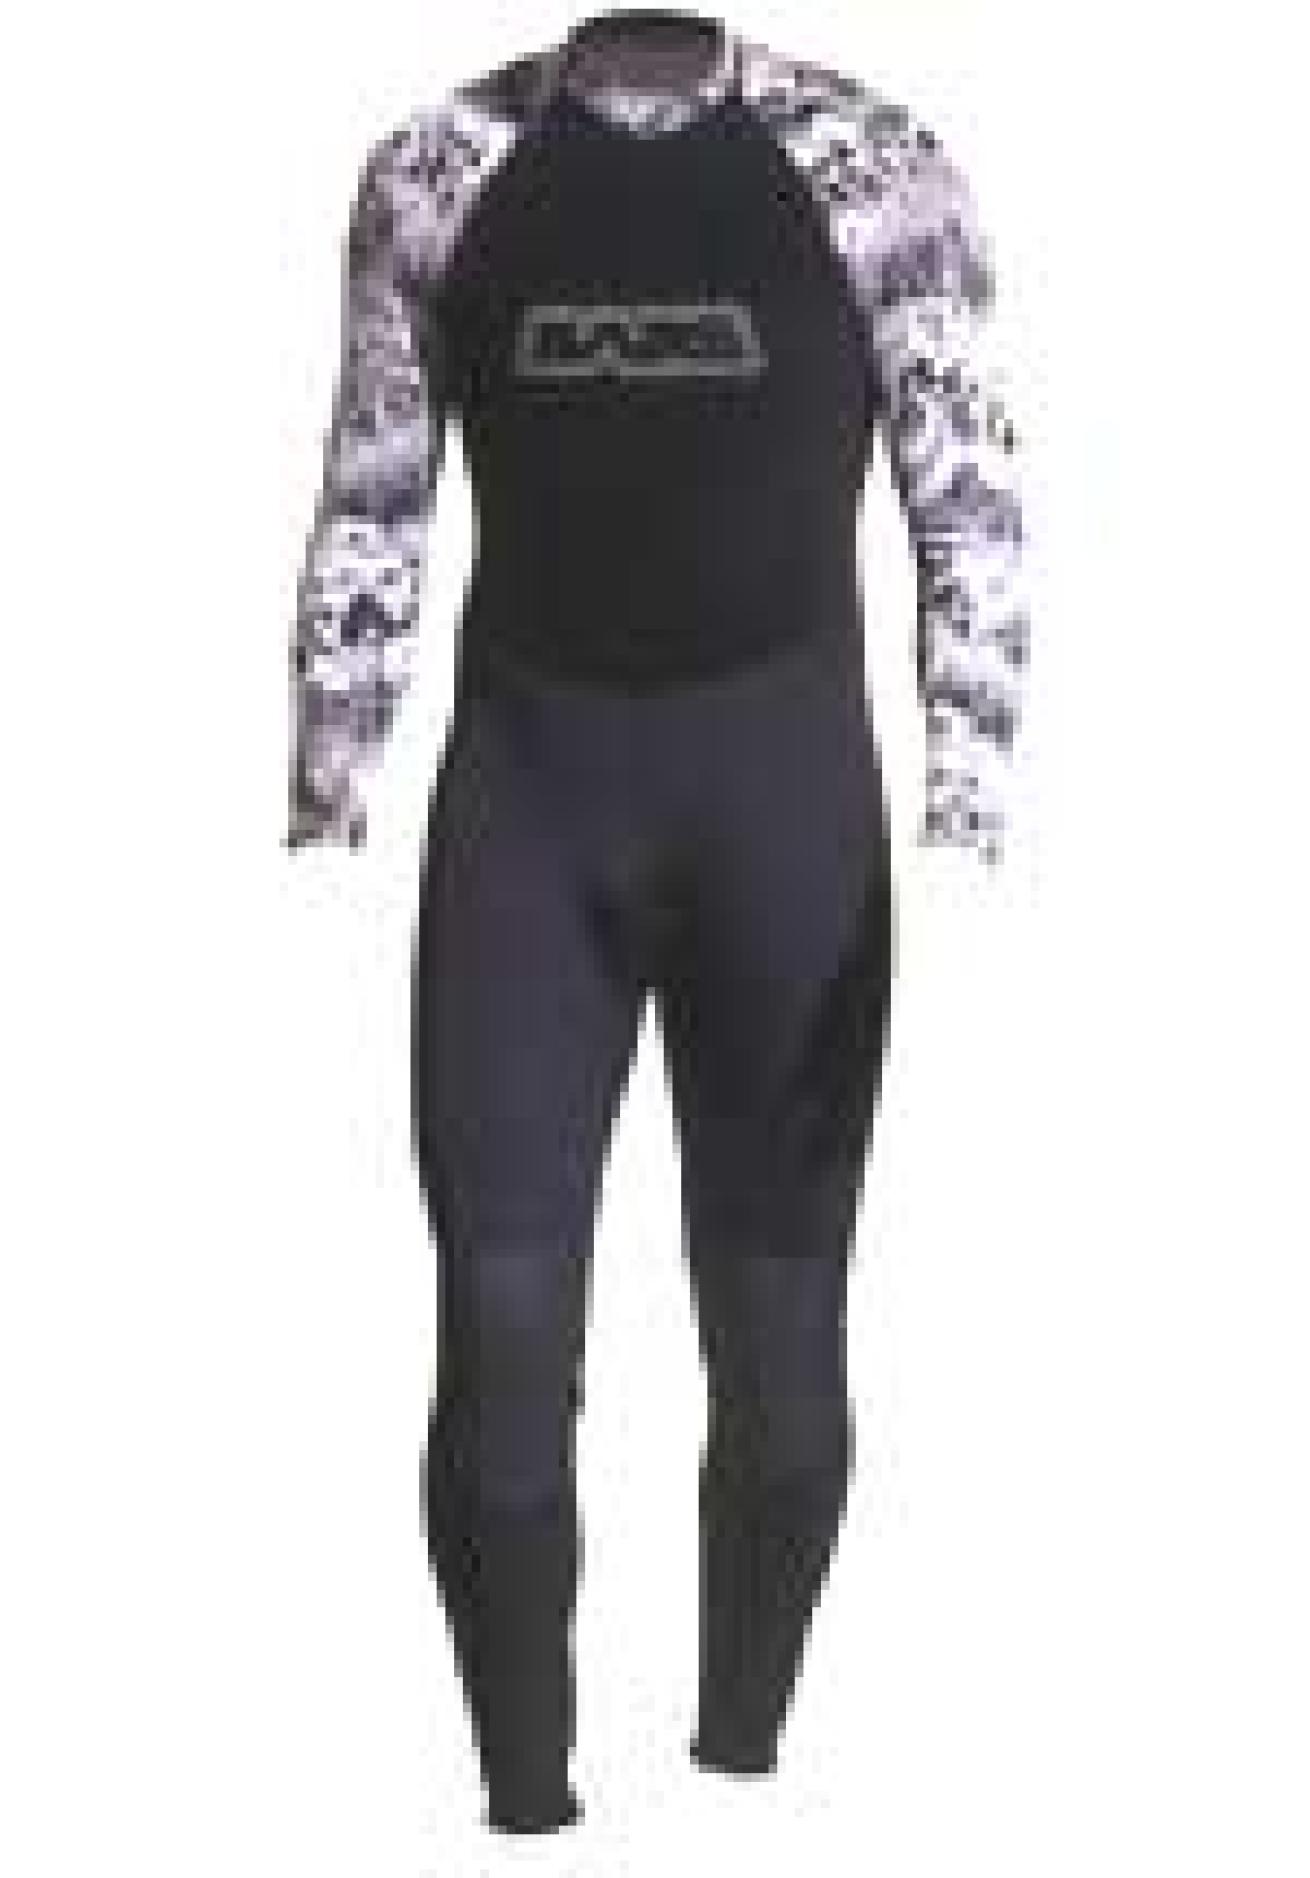 Bare Thermalskin 1.5mm dive skin wetsuit